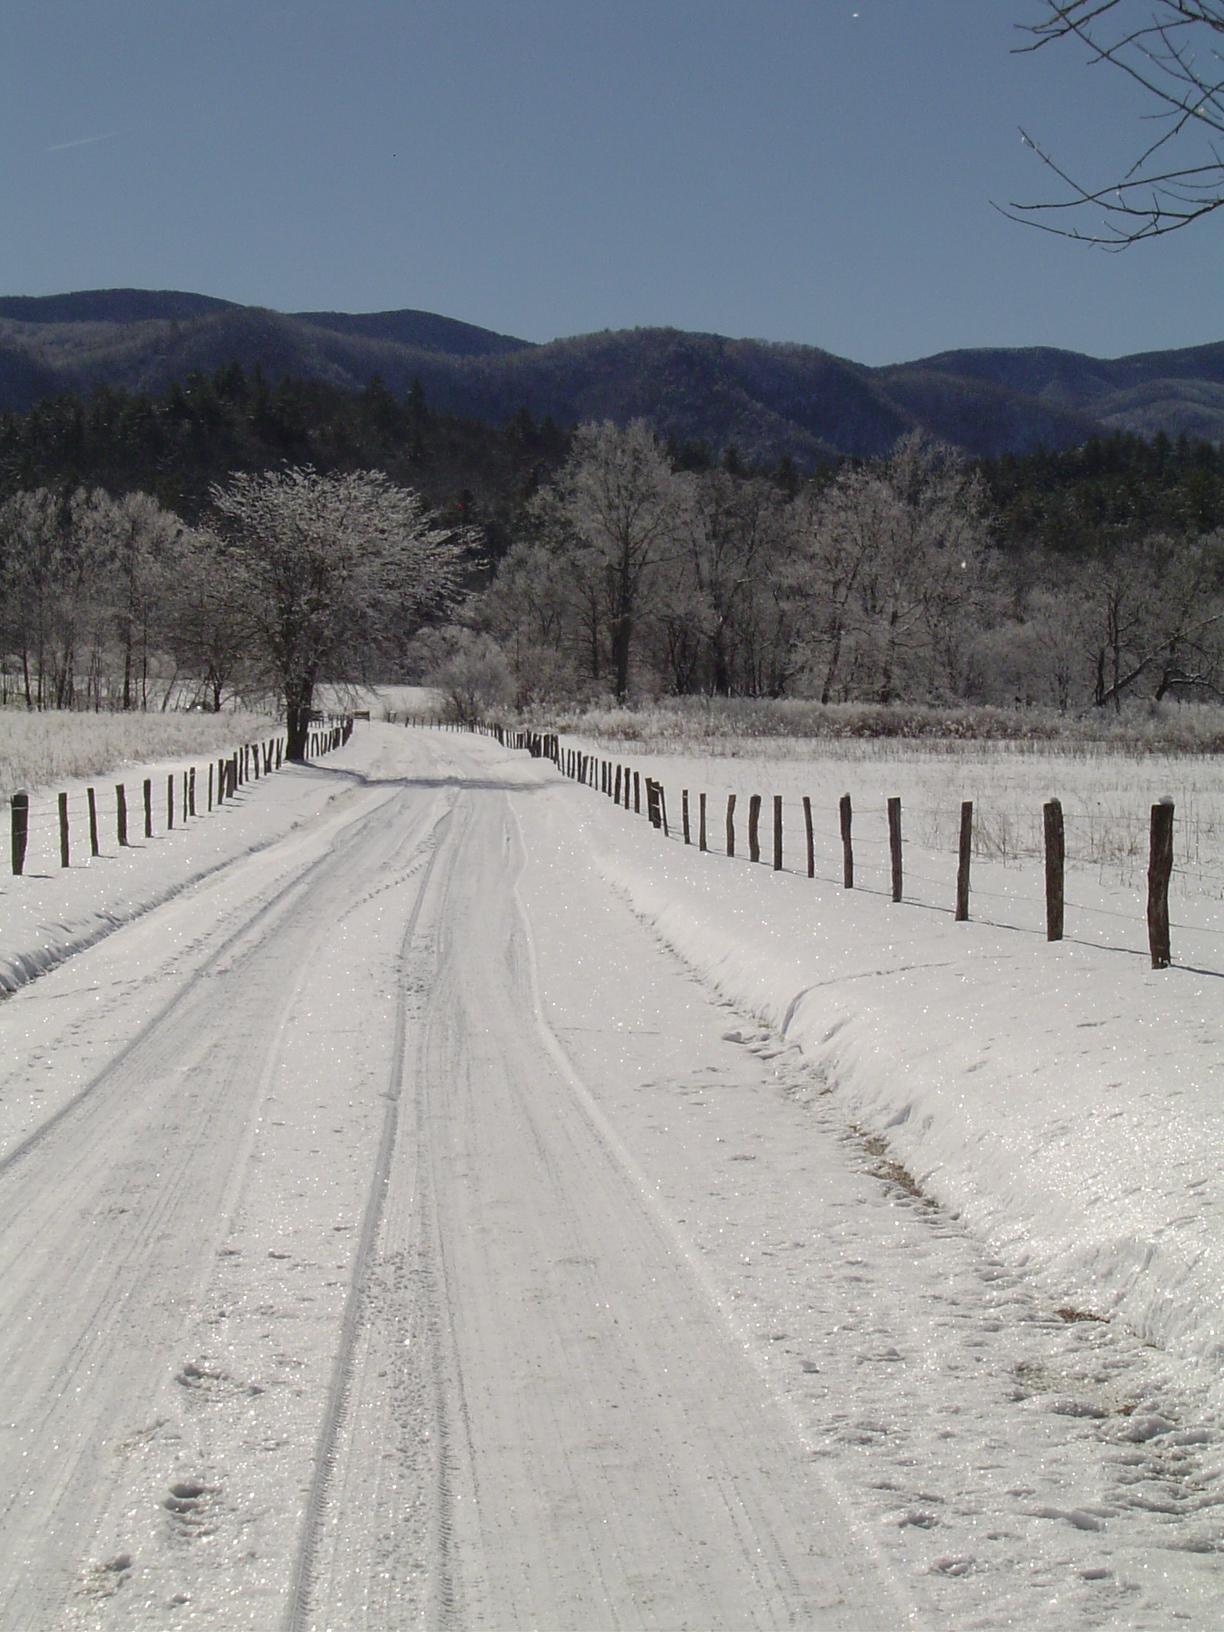 The Cades Cove Loop Road is beautiful year-round and open all year long.